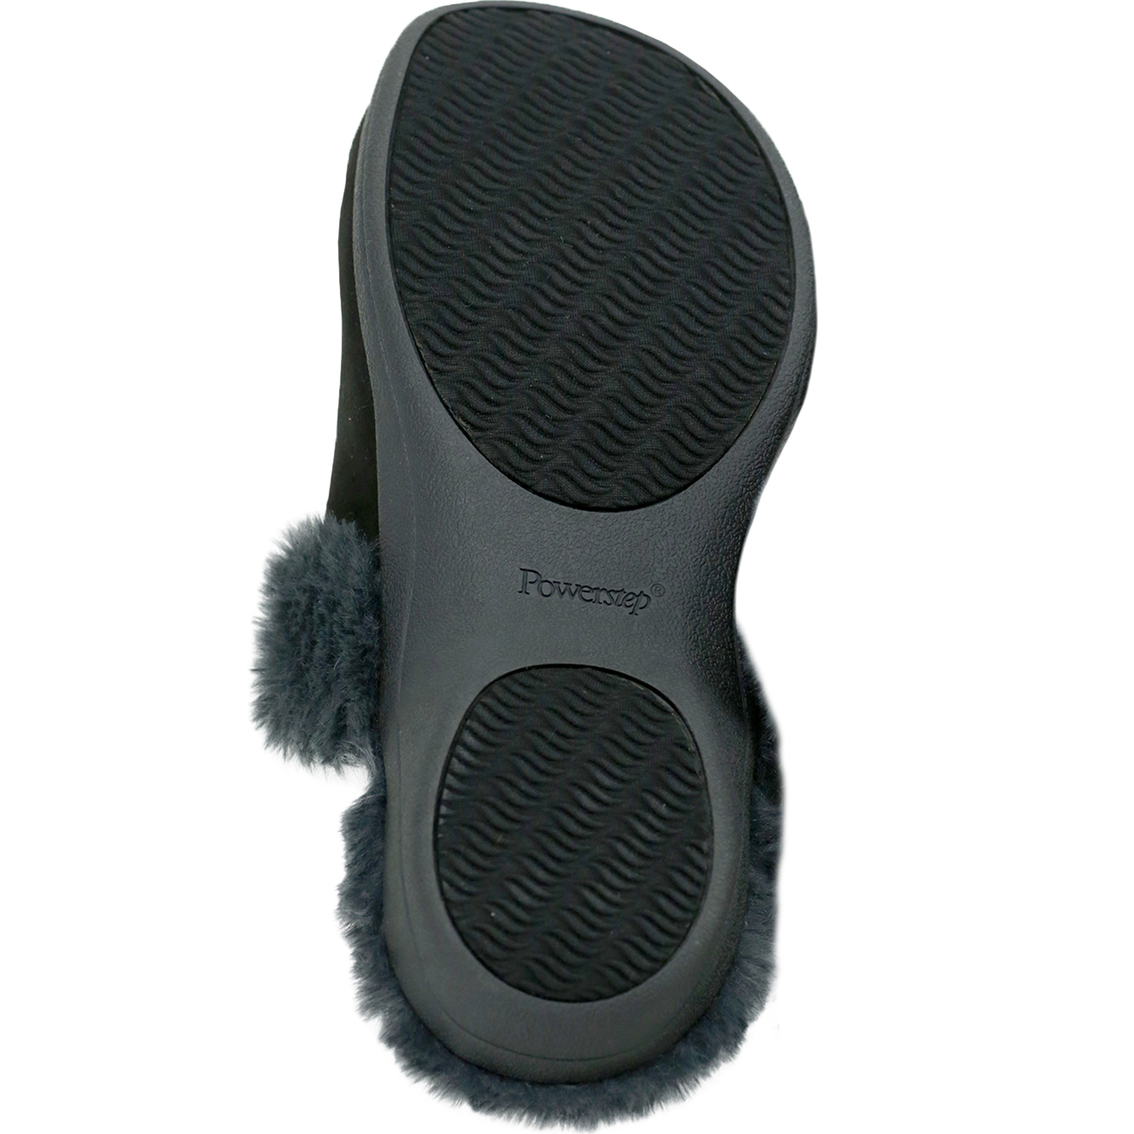 Powerstep Women's Luxe Orthotic Slippers - Image 3 of 5